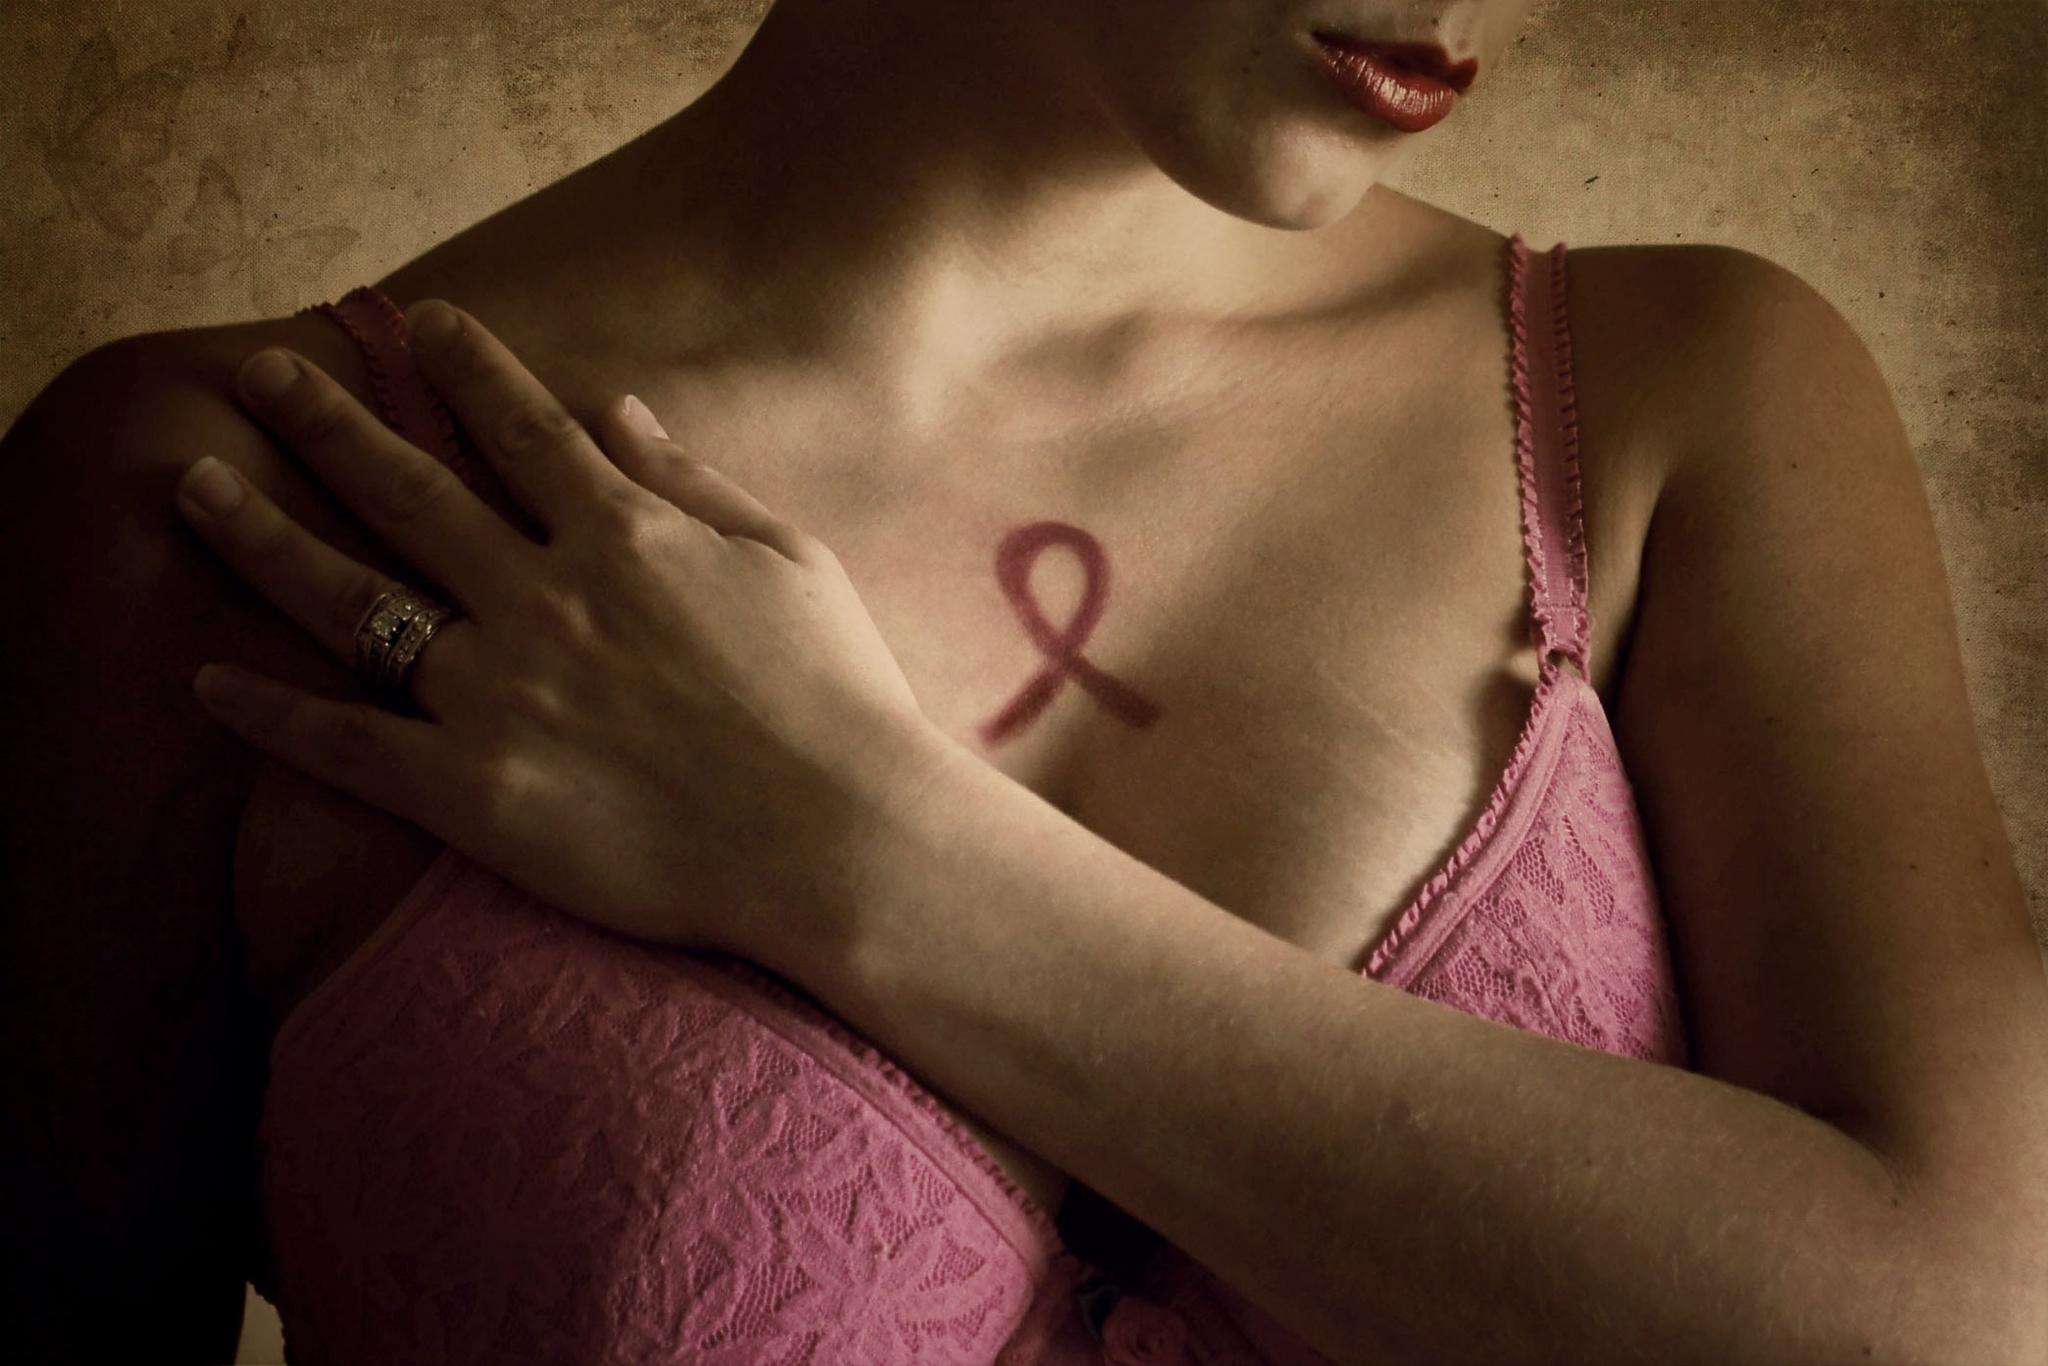 Breast Cancer Rate Among Black Women Equal To White Women's For First Time
